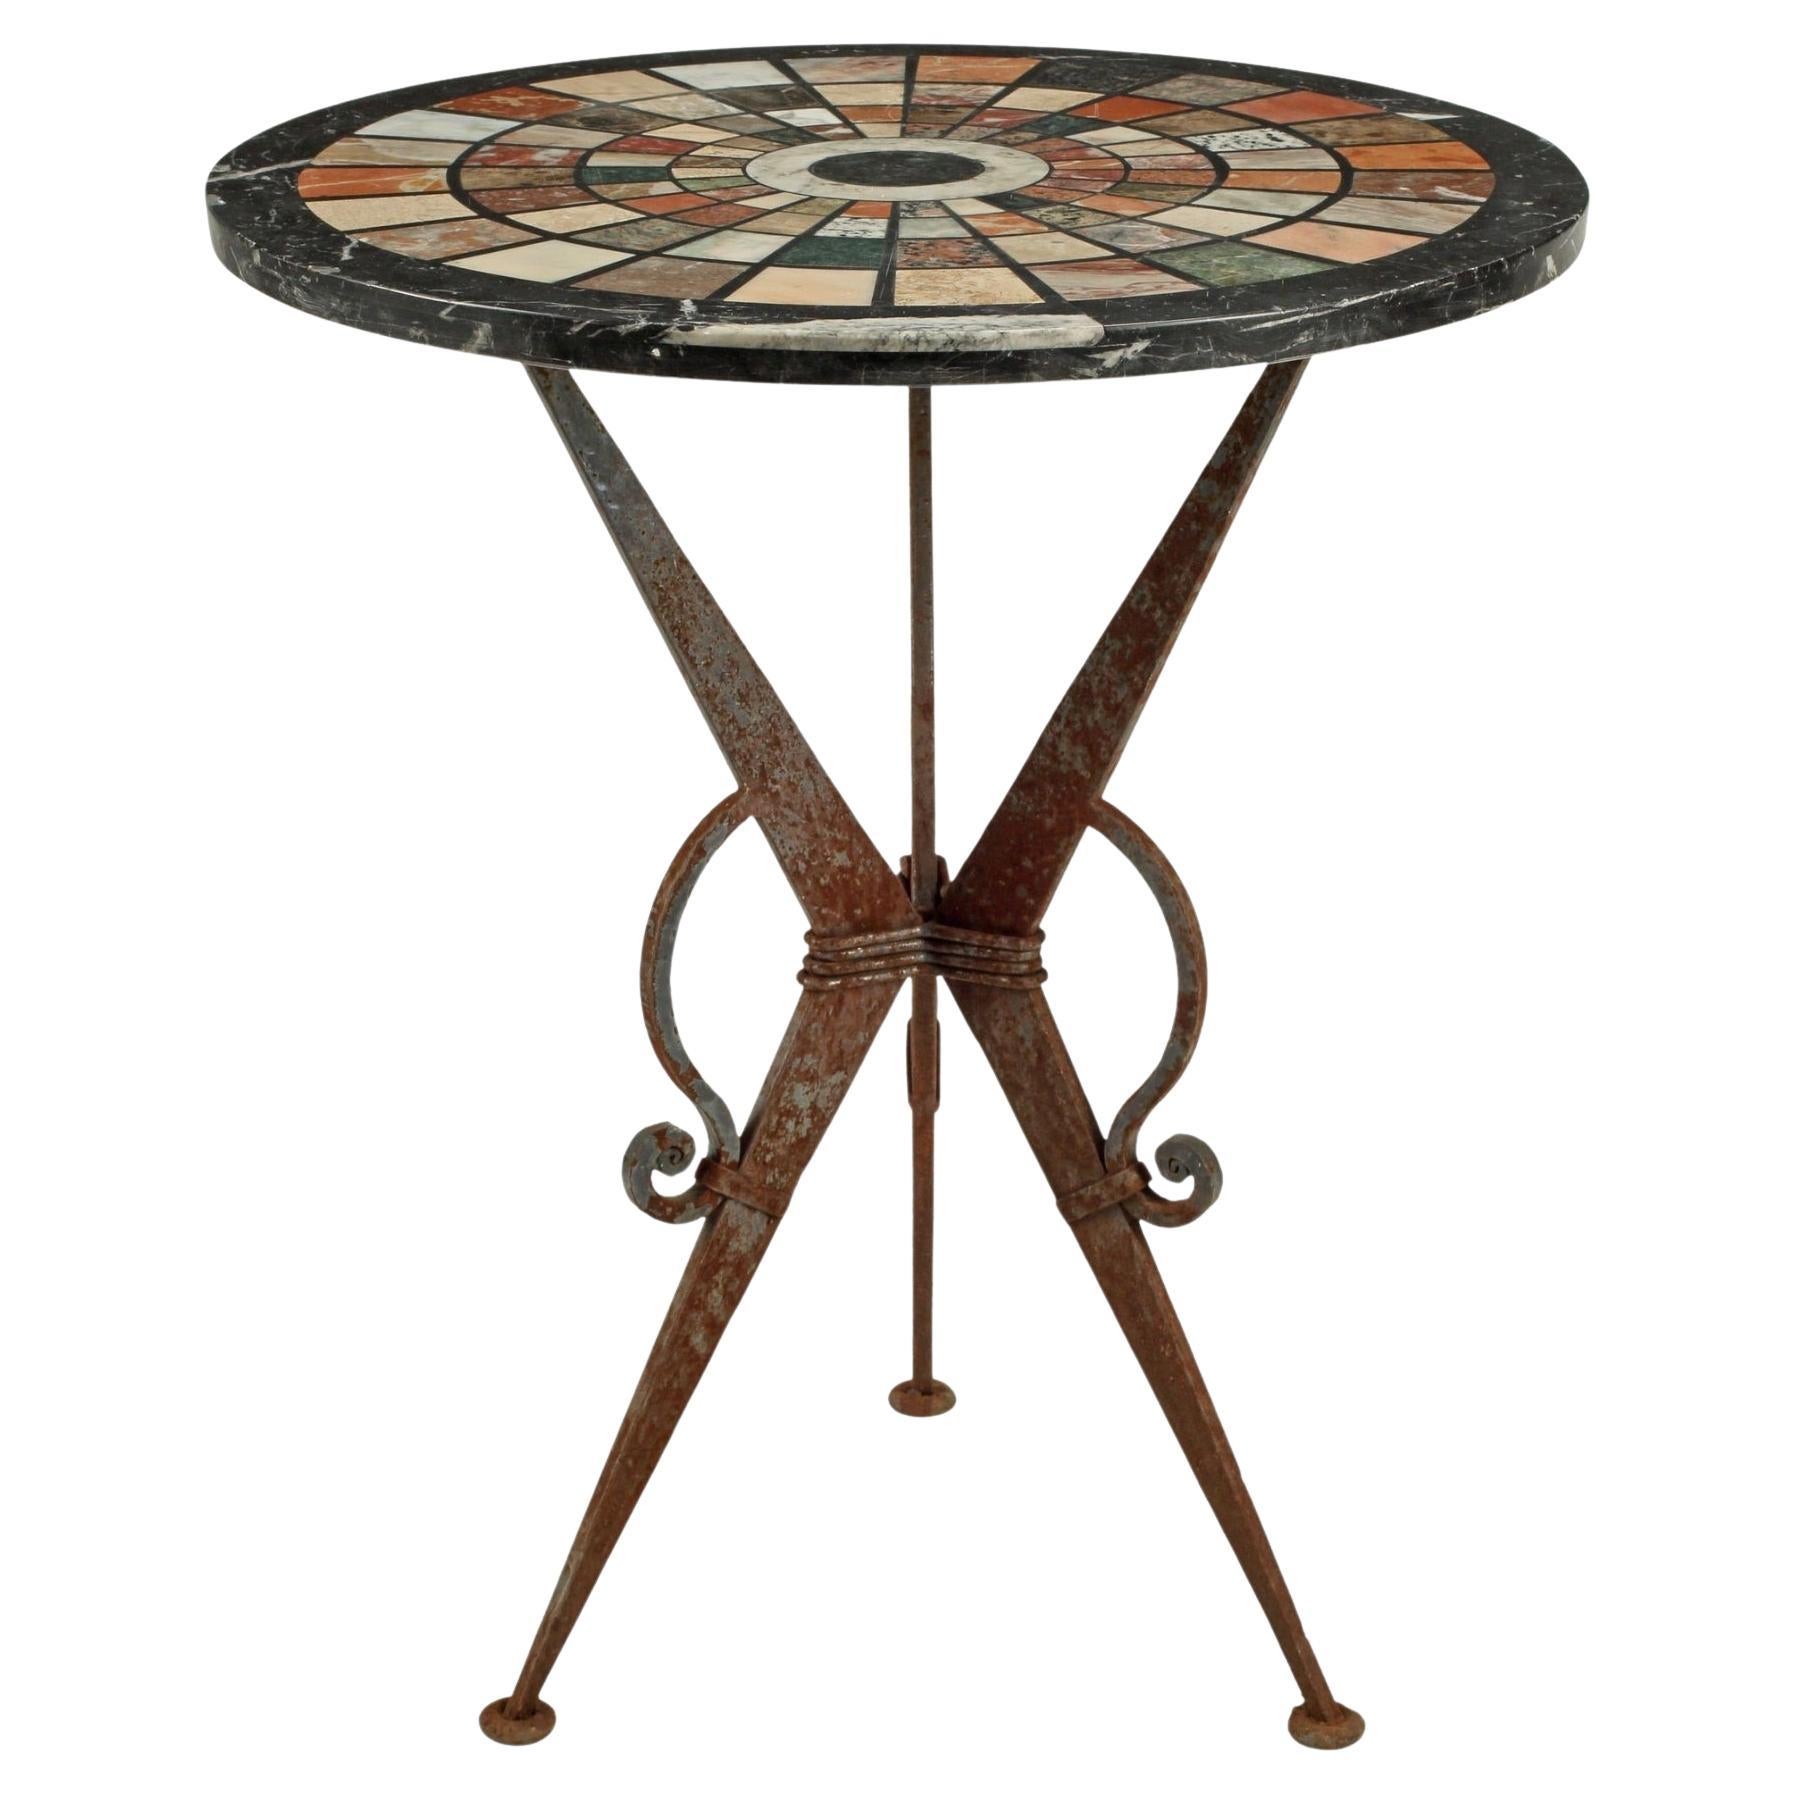 Italian Specimen Marble Top Wrought Iron Round Table For Sale